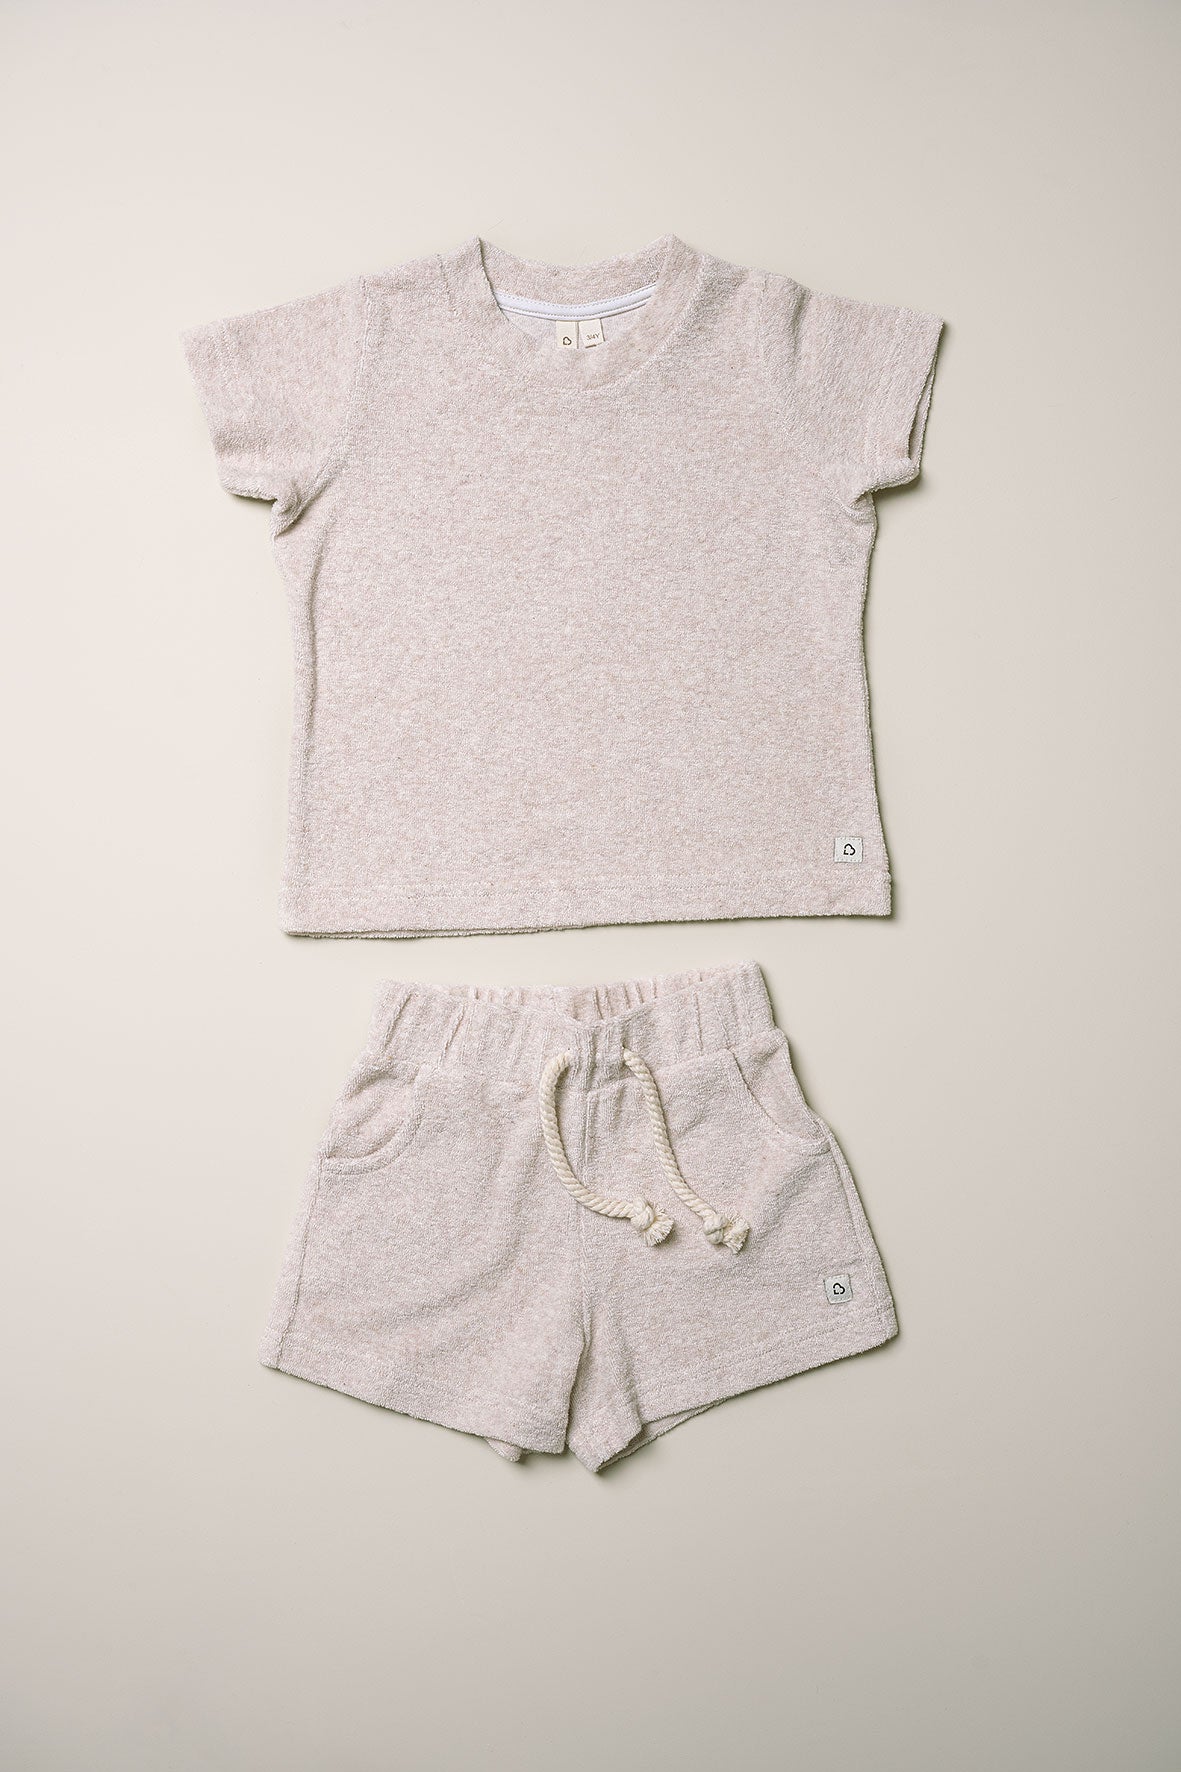 Unisex 2 pieces t-shirt and shorts terry set-Oatmeal